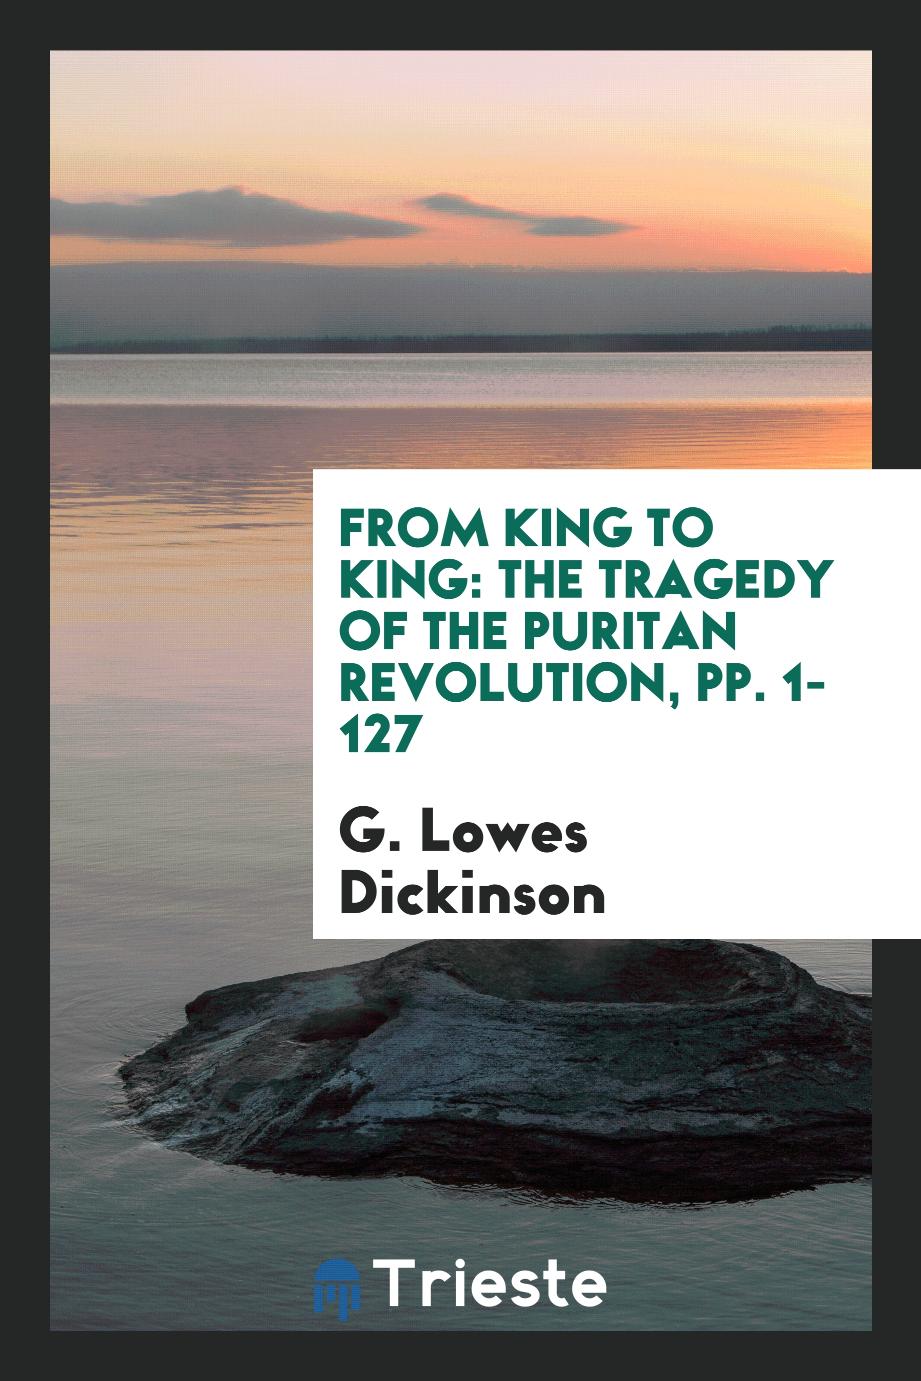 From King to King: The Tragedy of the Puritan Revolution, pp. 1-127